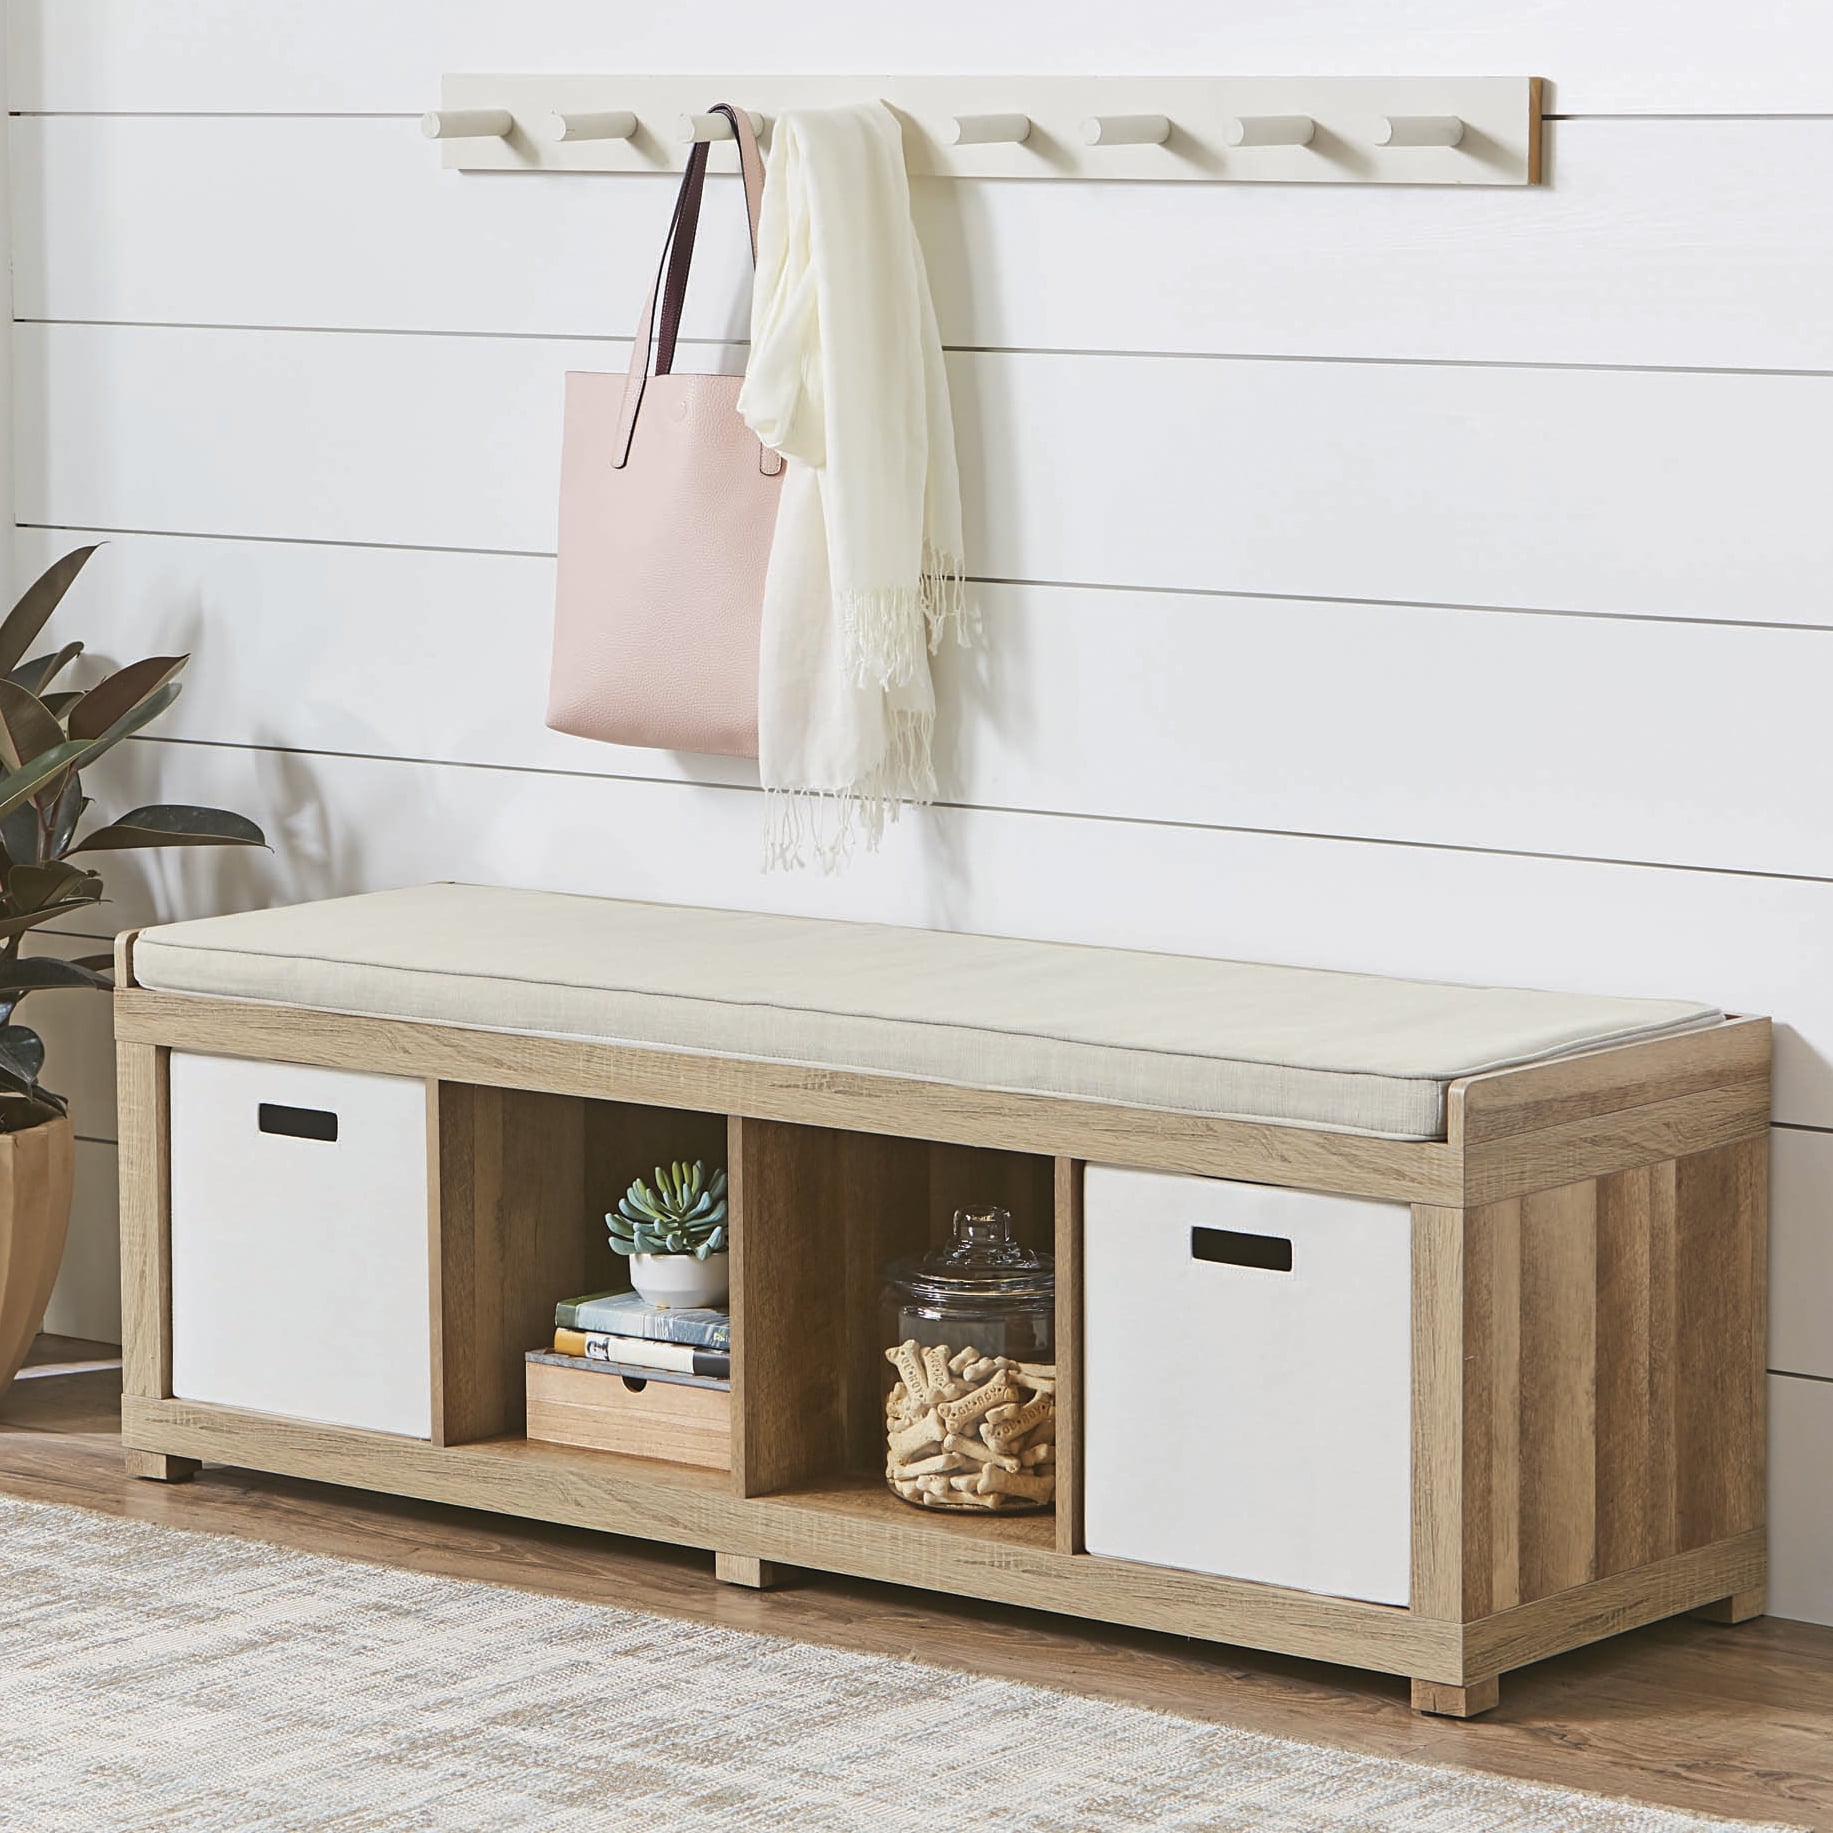 Better Homes & Gardens 4-Cube Storage Bench, Weathered